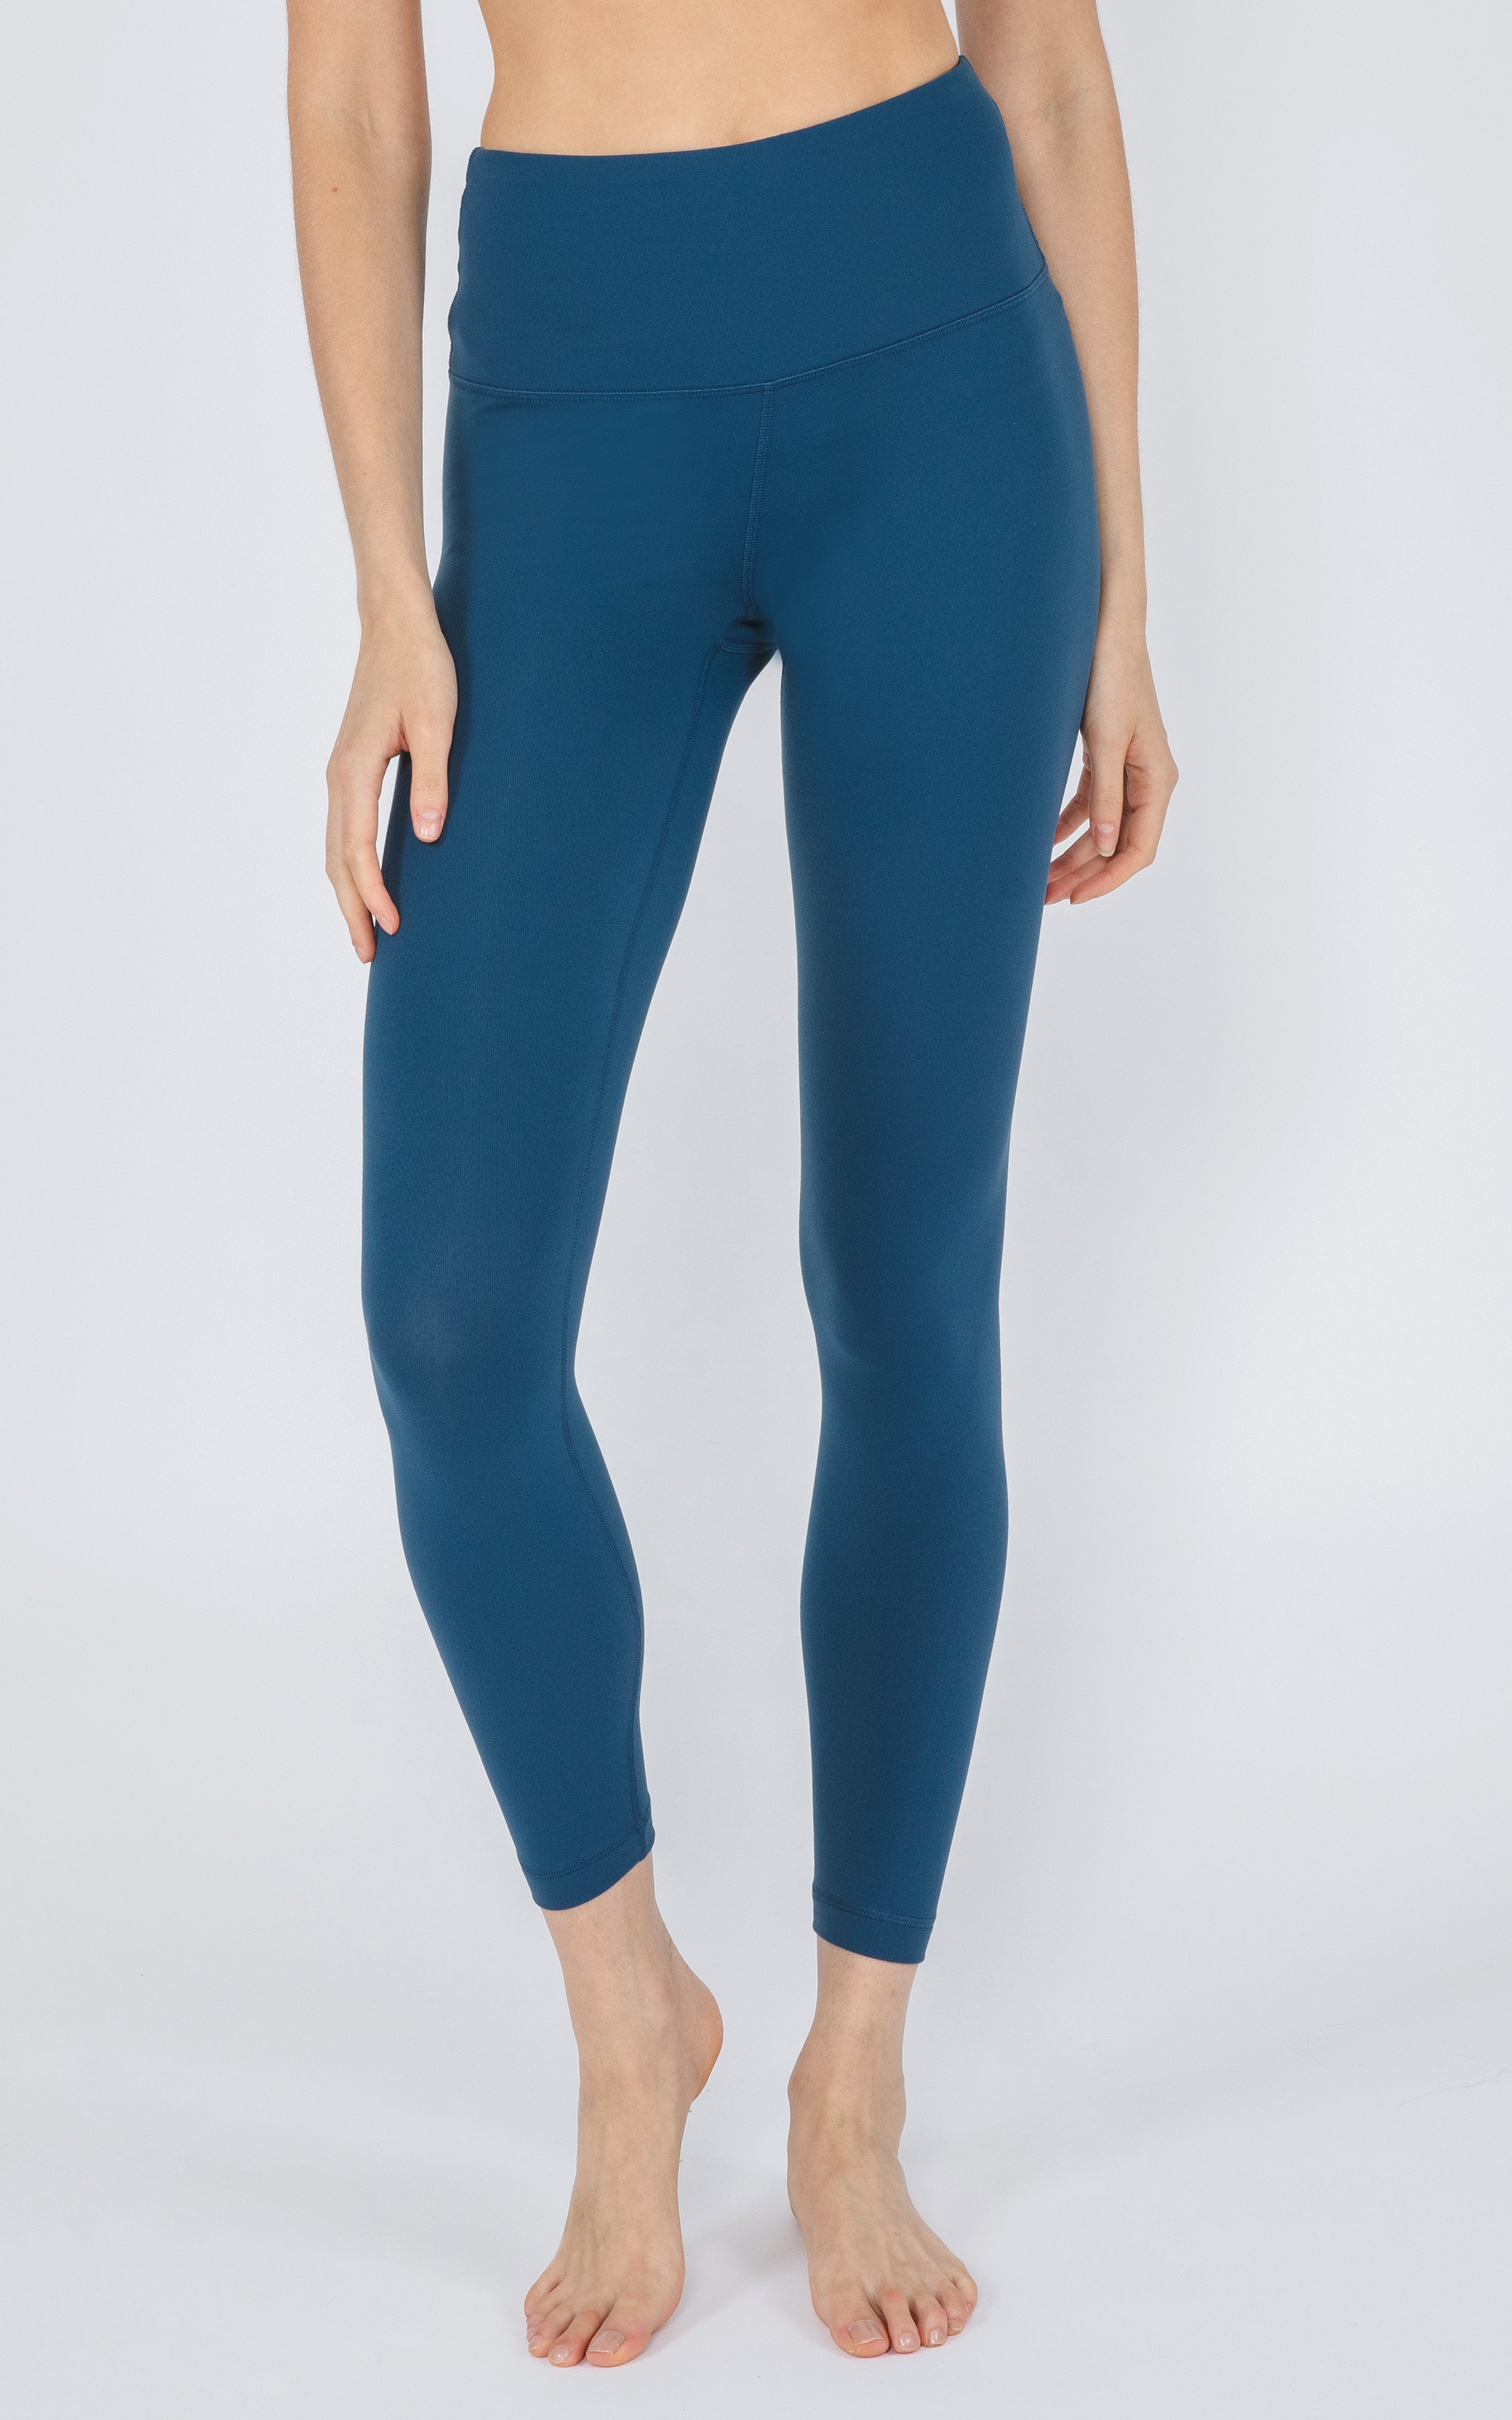 NEW 90 Degree by Reflex Prove Them Wrong Yoga Leggings Size Small $88  Retail